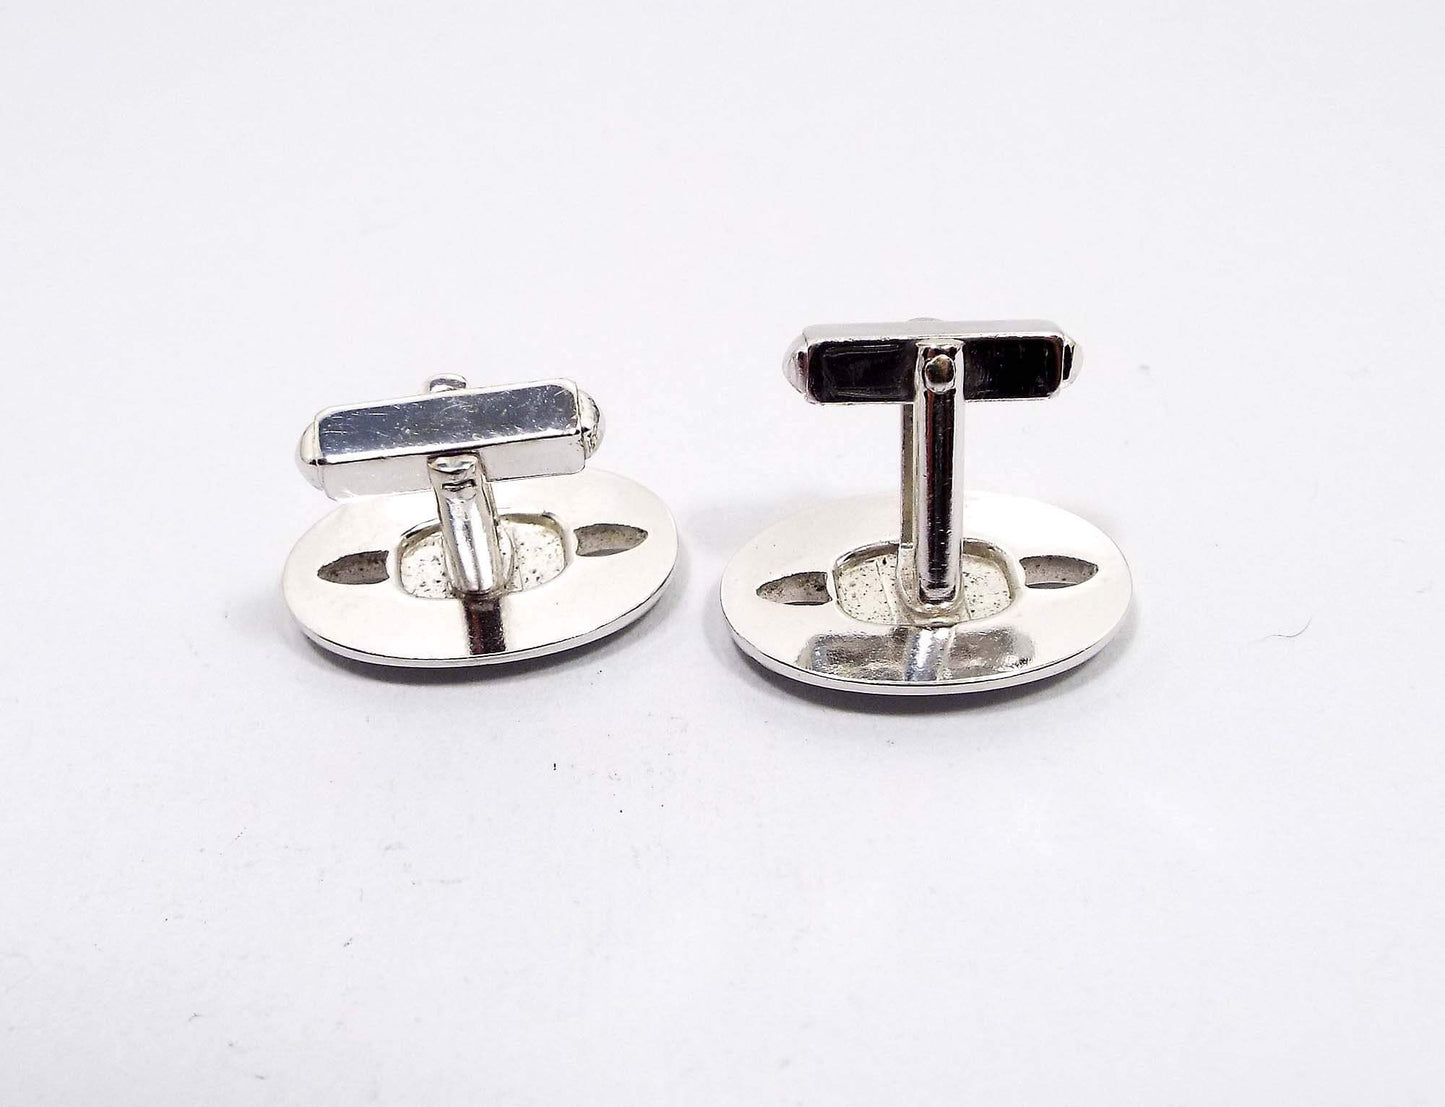 Anson Vintage Angled Back Silver Tone Cufflinks, Oval Cuff Links